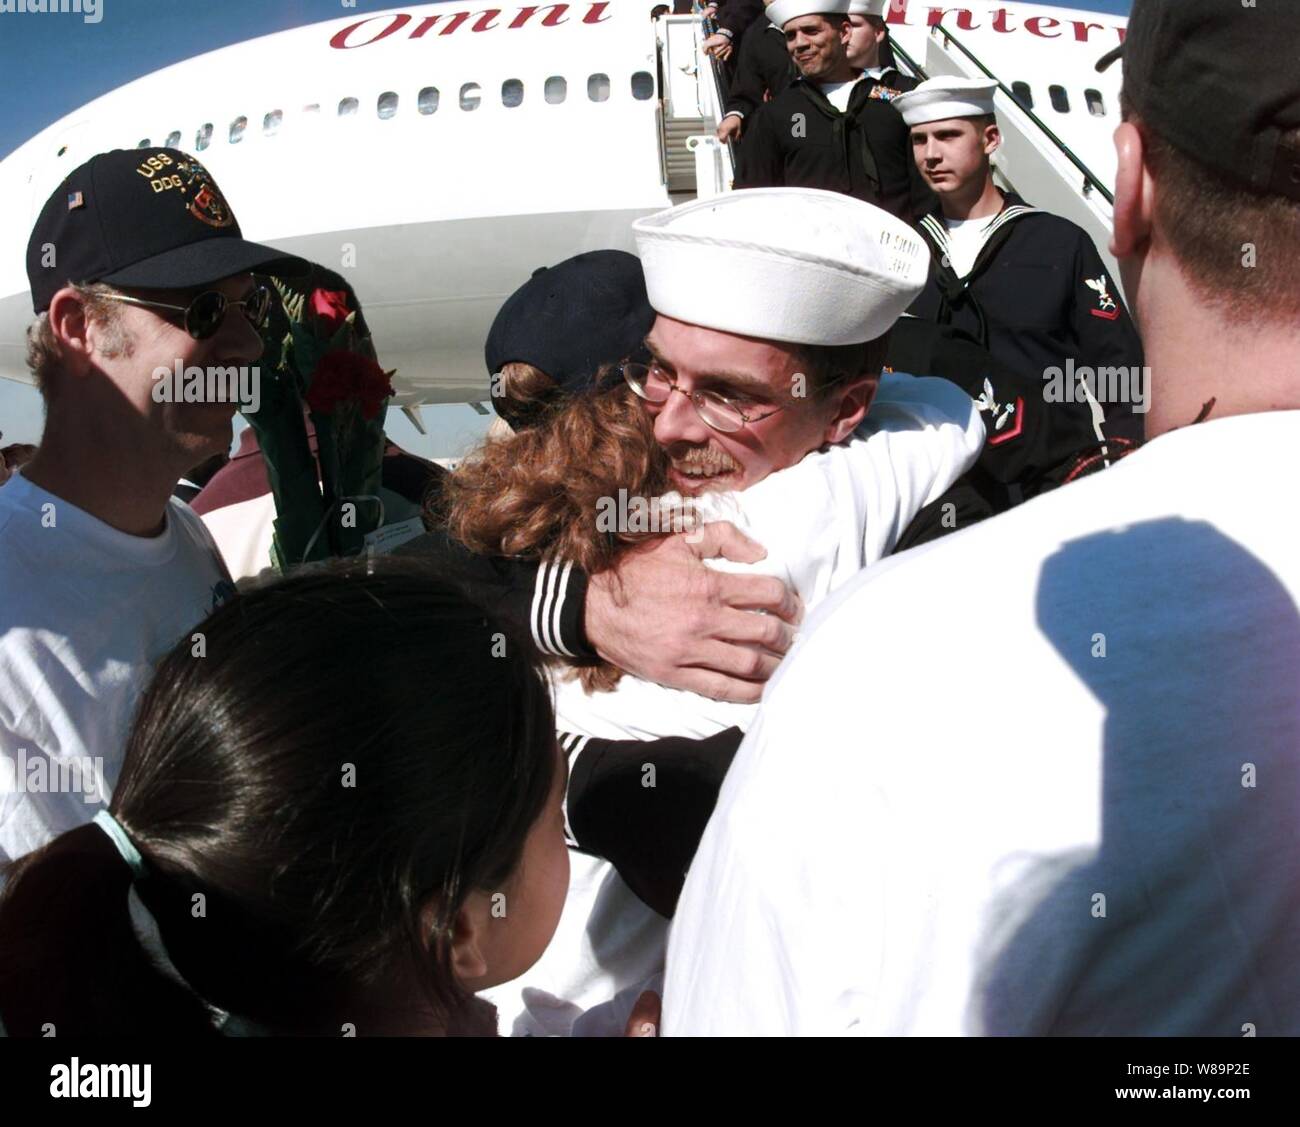 A sailor from the USS Cole (DDG 67) is greeted by friends and family members as the crew returns to their home port at Naval Station Norfolk, Va., on Nov. 3, 2000.  The Arleigh Burke class destroyer was the target of a suspected terrorist attack in the port of Aden, Yemen, on Oct. 12, 2000, during a scheduled refueling.  The attack killed 17 crew members and injured 39 others.  The USS Cole is being transported by the Norwegian heavy transport ship M/V Blue Marlin back to the United States for repair. Stock Photo